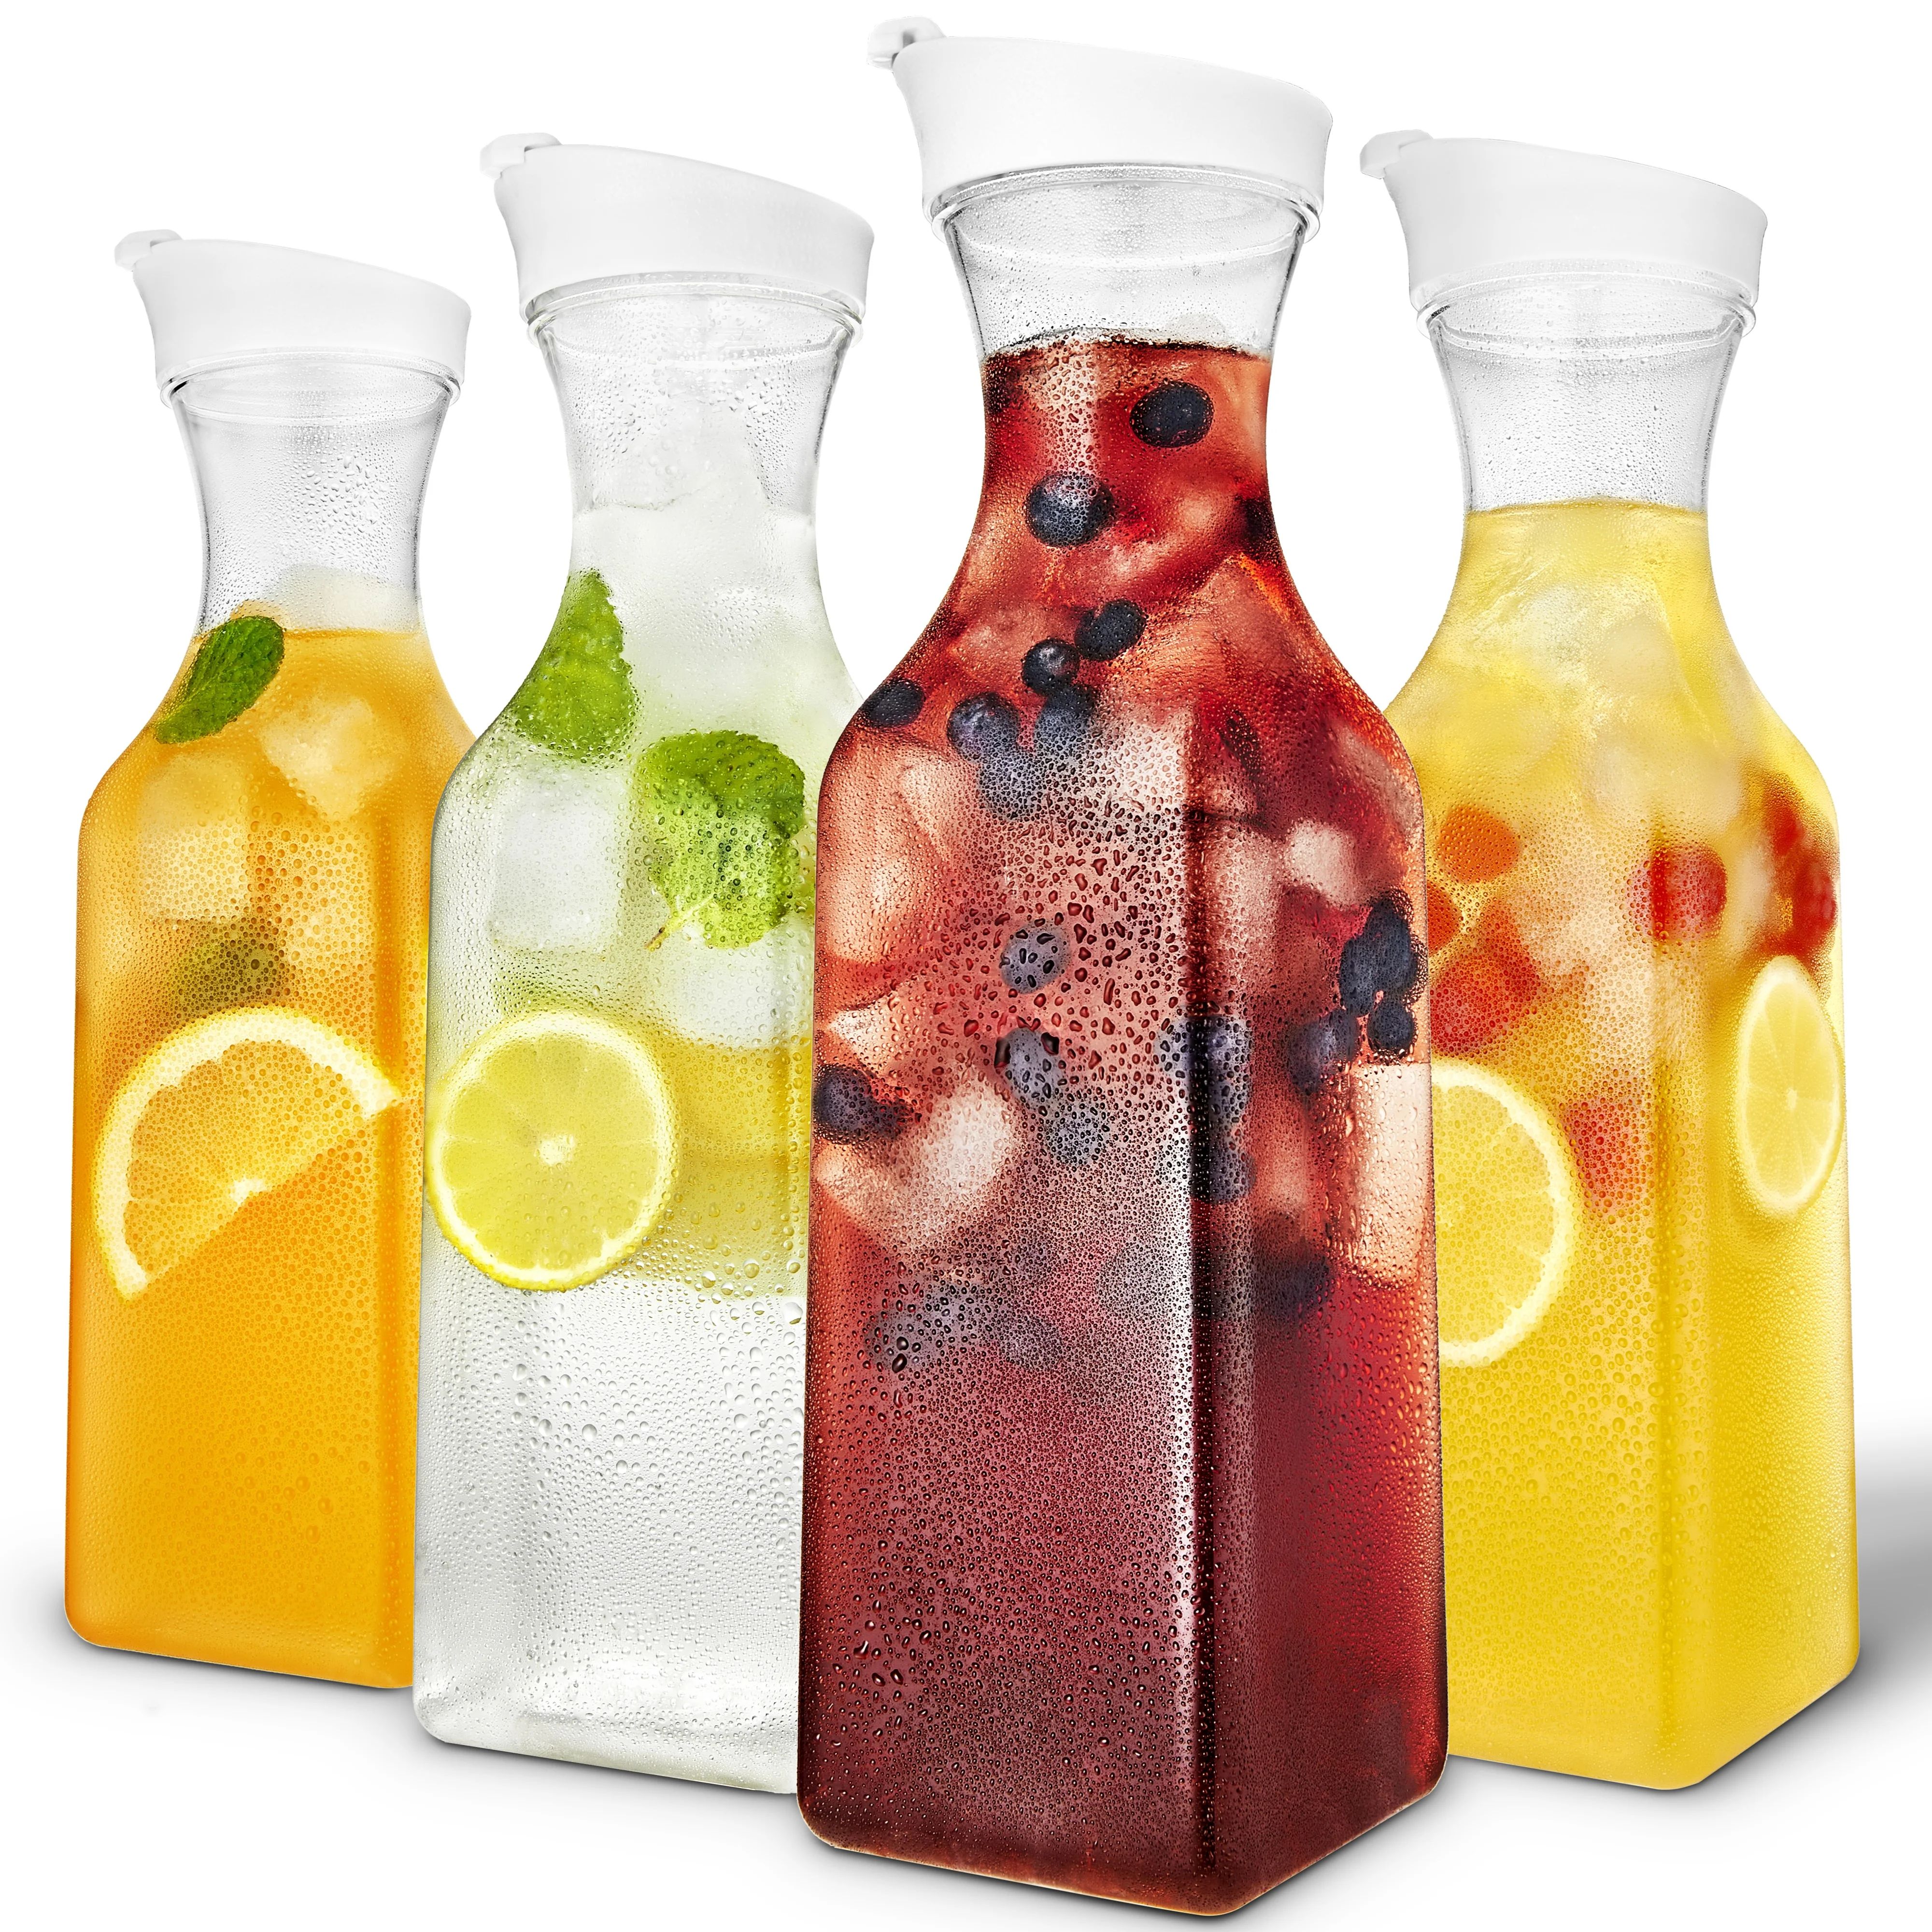 Stock Your Home 50 oz Square Carafes Plastic Juice Carafe with Lids (Set of 4) 50 oz Carafes for ... | Walmart (US)